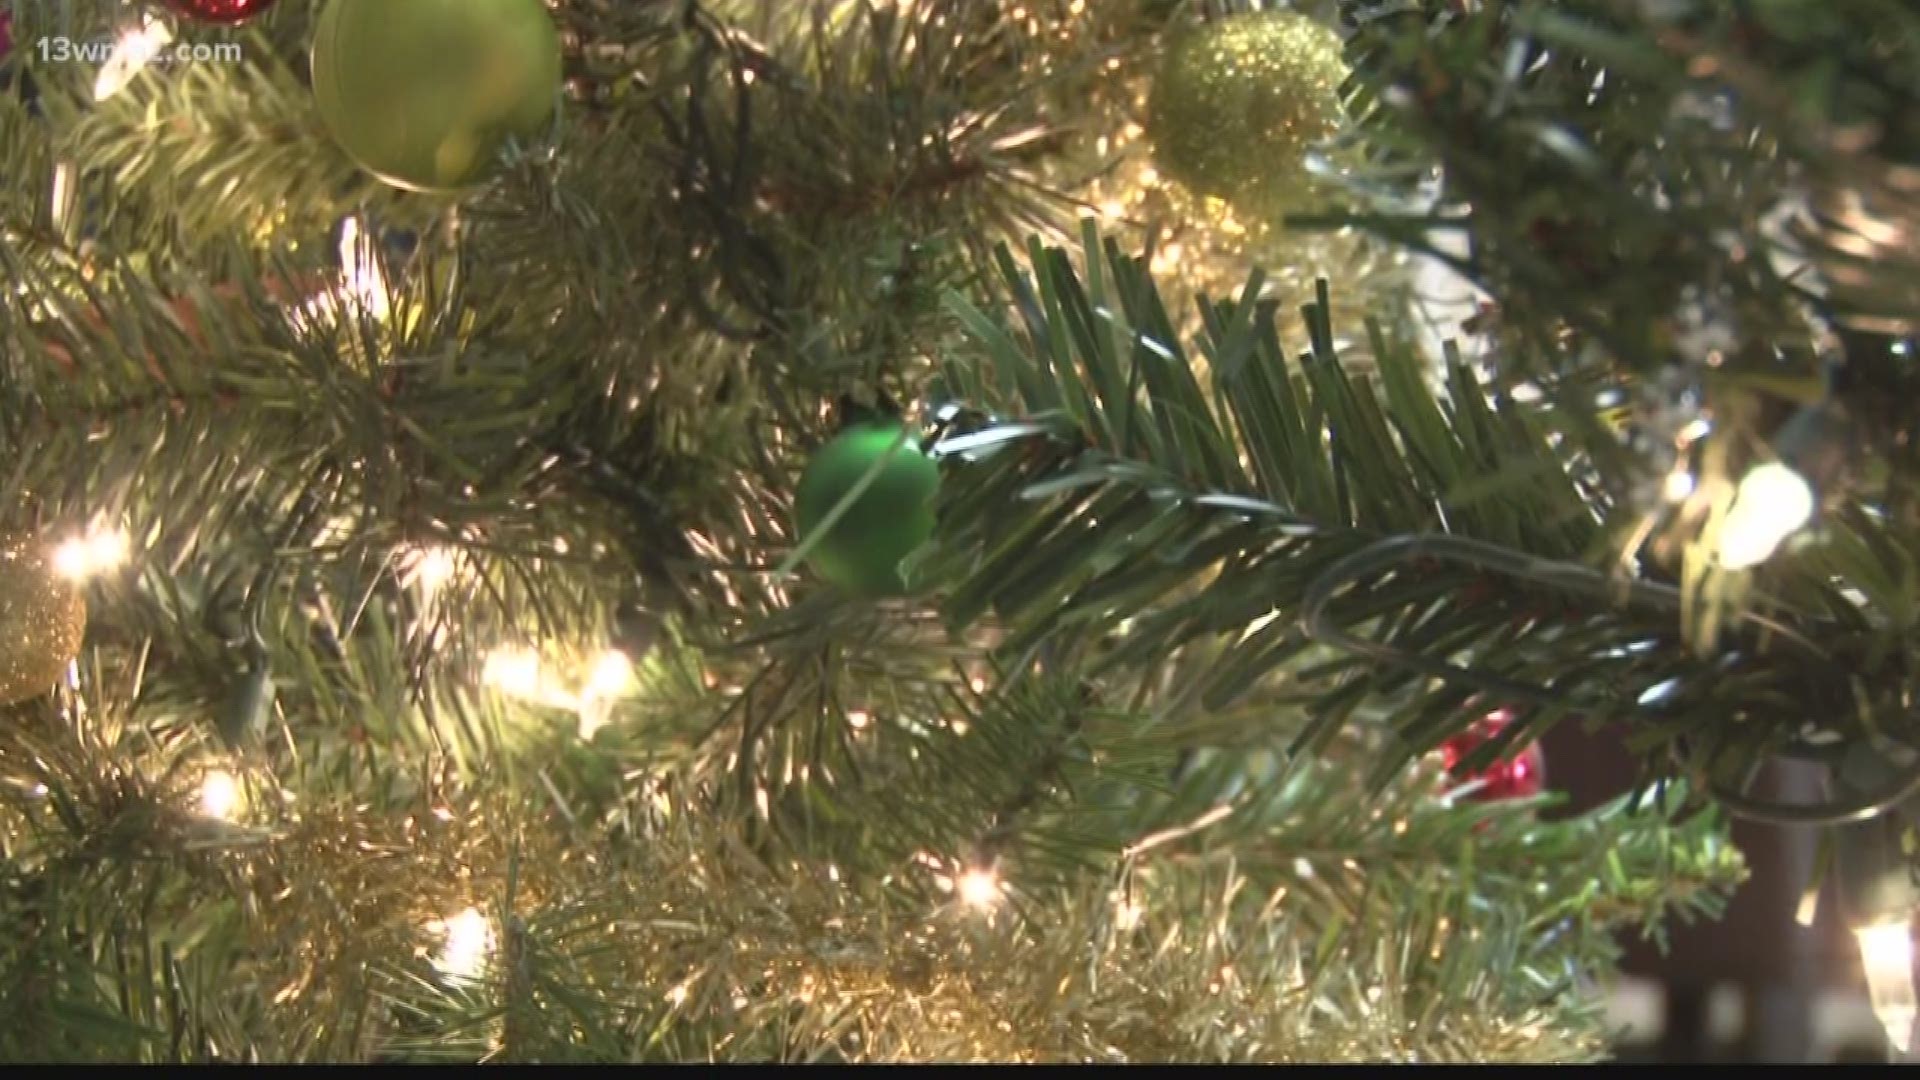 Students collect new or used Christmas trees